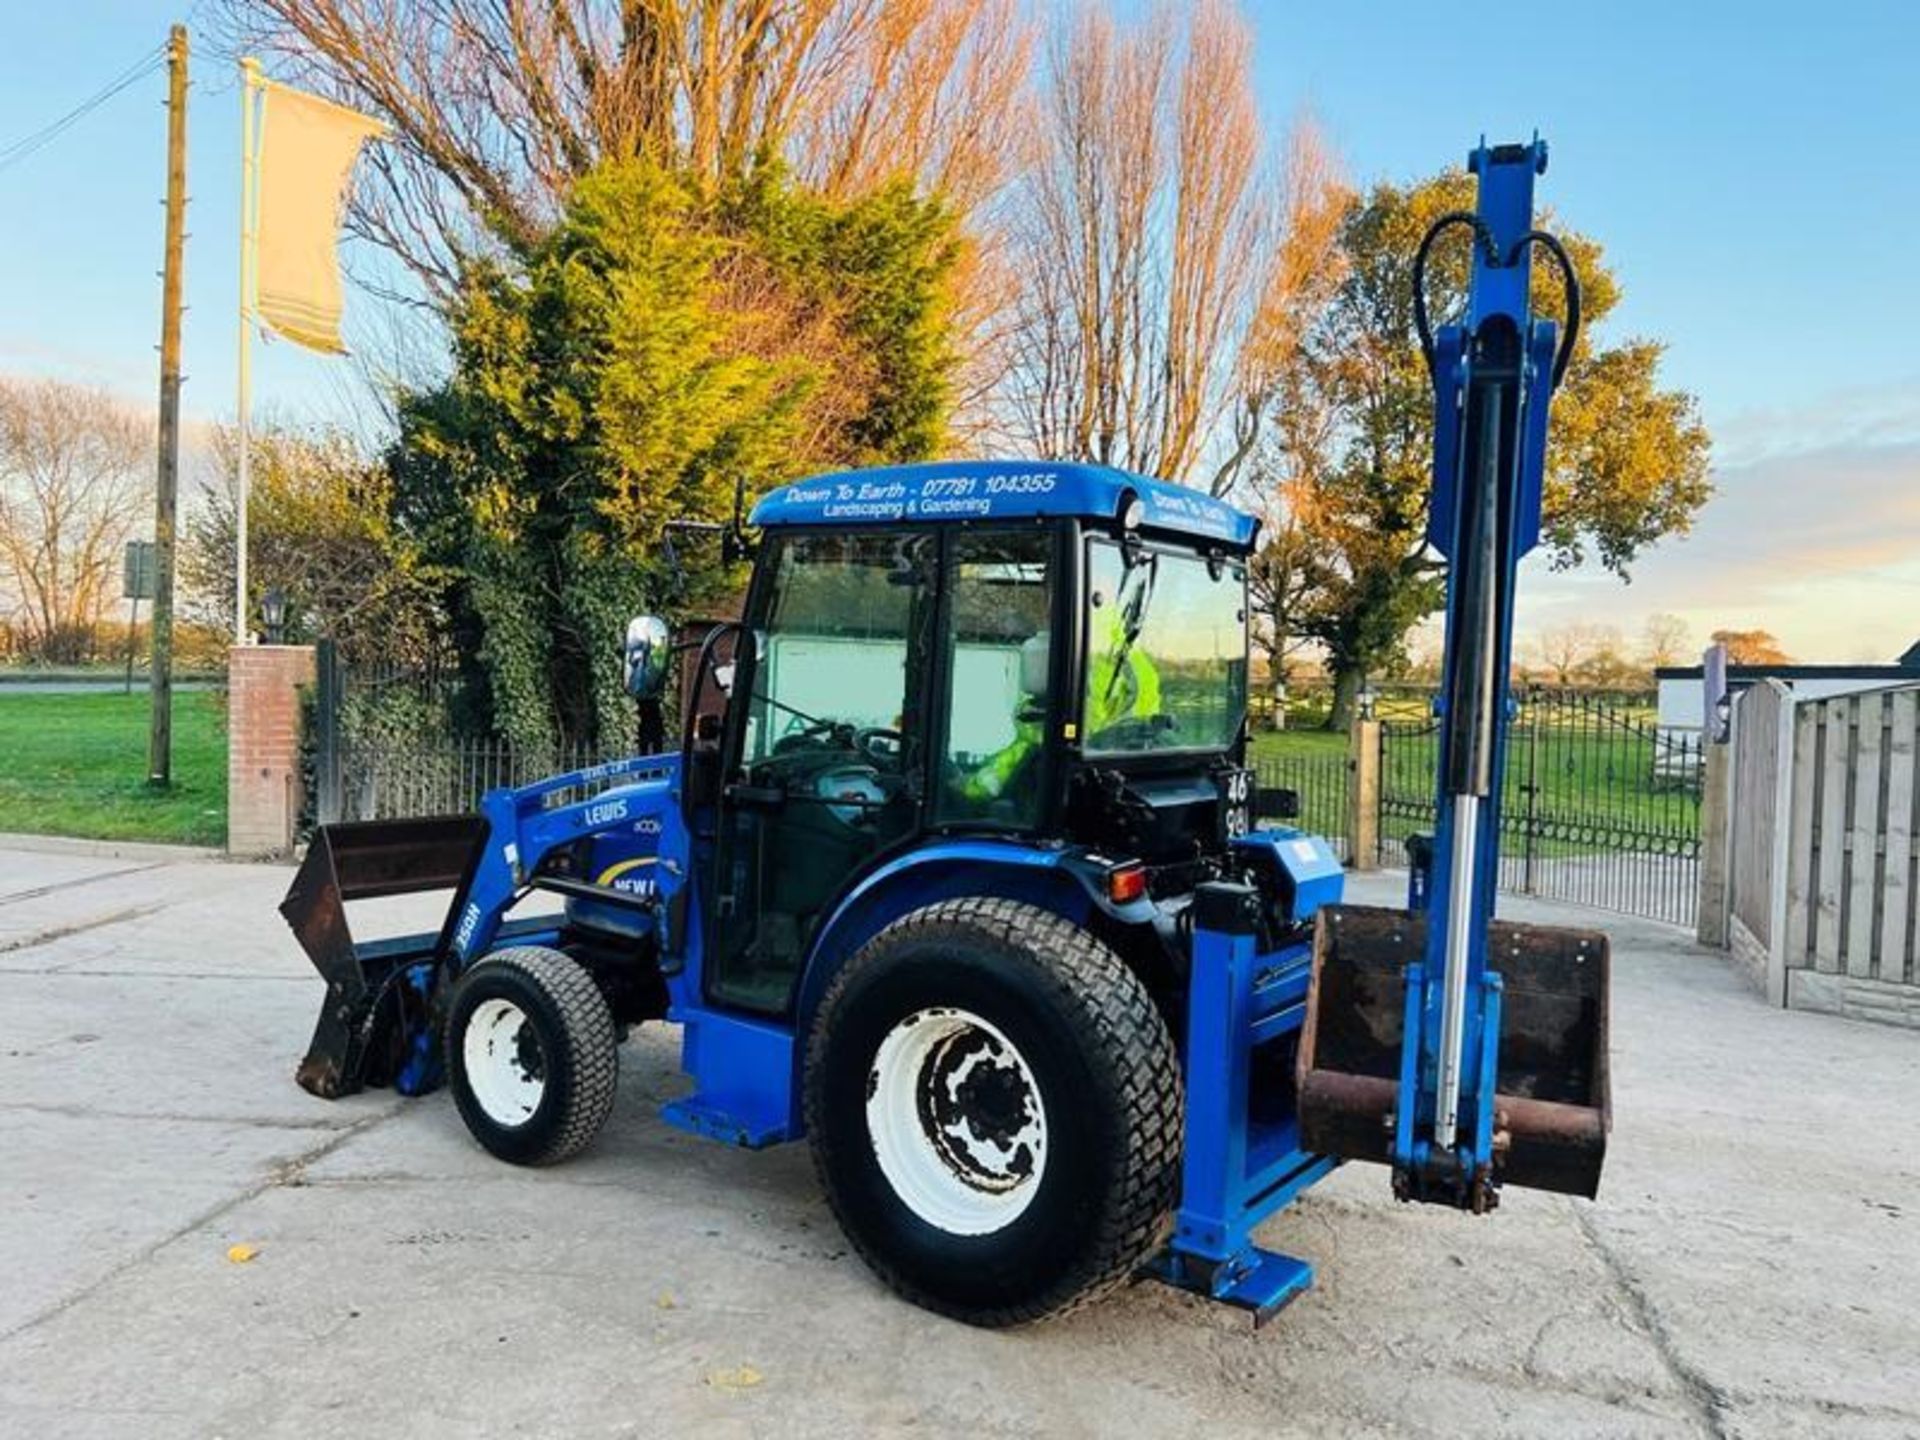 NEW HOLLAND BOOMER 40 4WD TRACTOR *YEAR 2014, ONLY 737 HRS* C/W LOADER & BACK TACTOR - Image 19 of 19